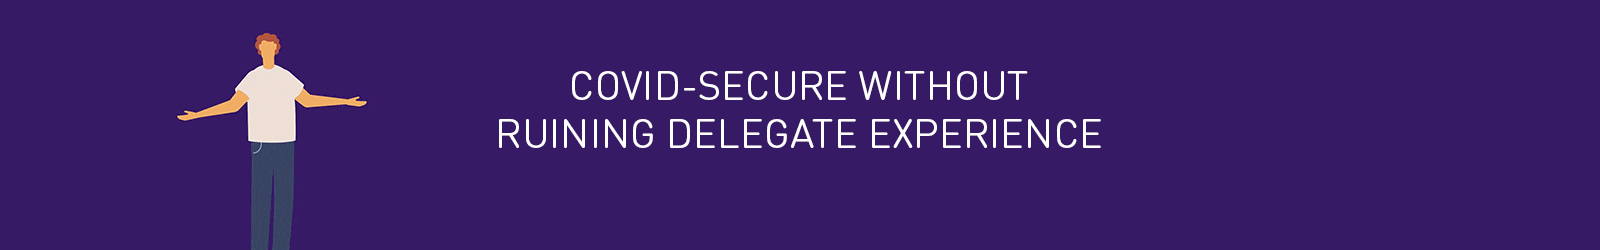 
Covid Secure Delegate Experience Banner
